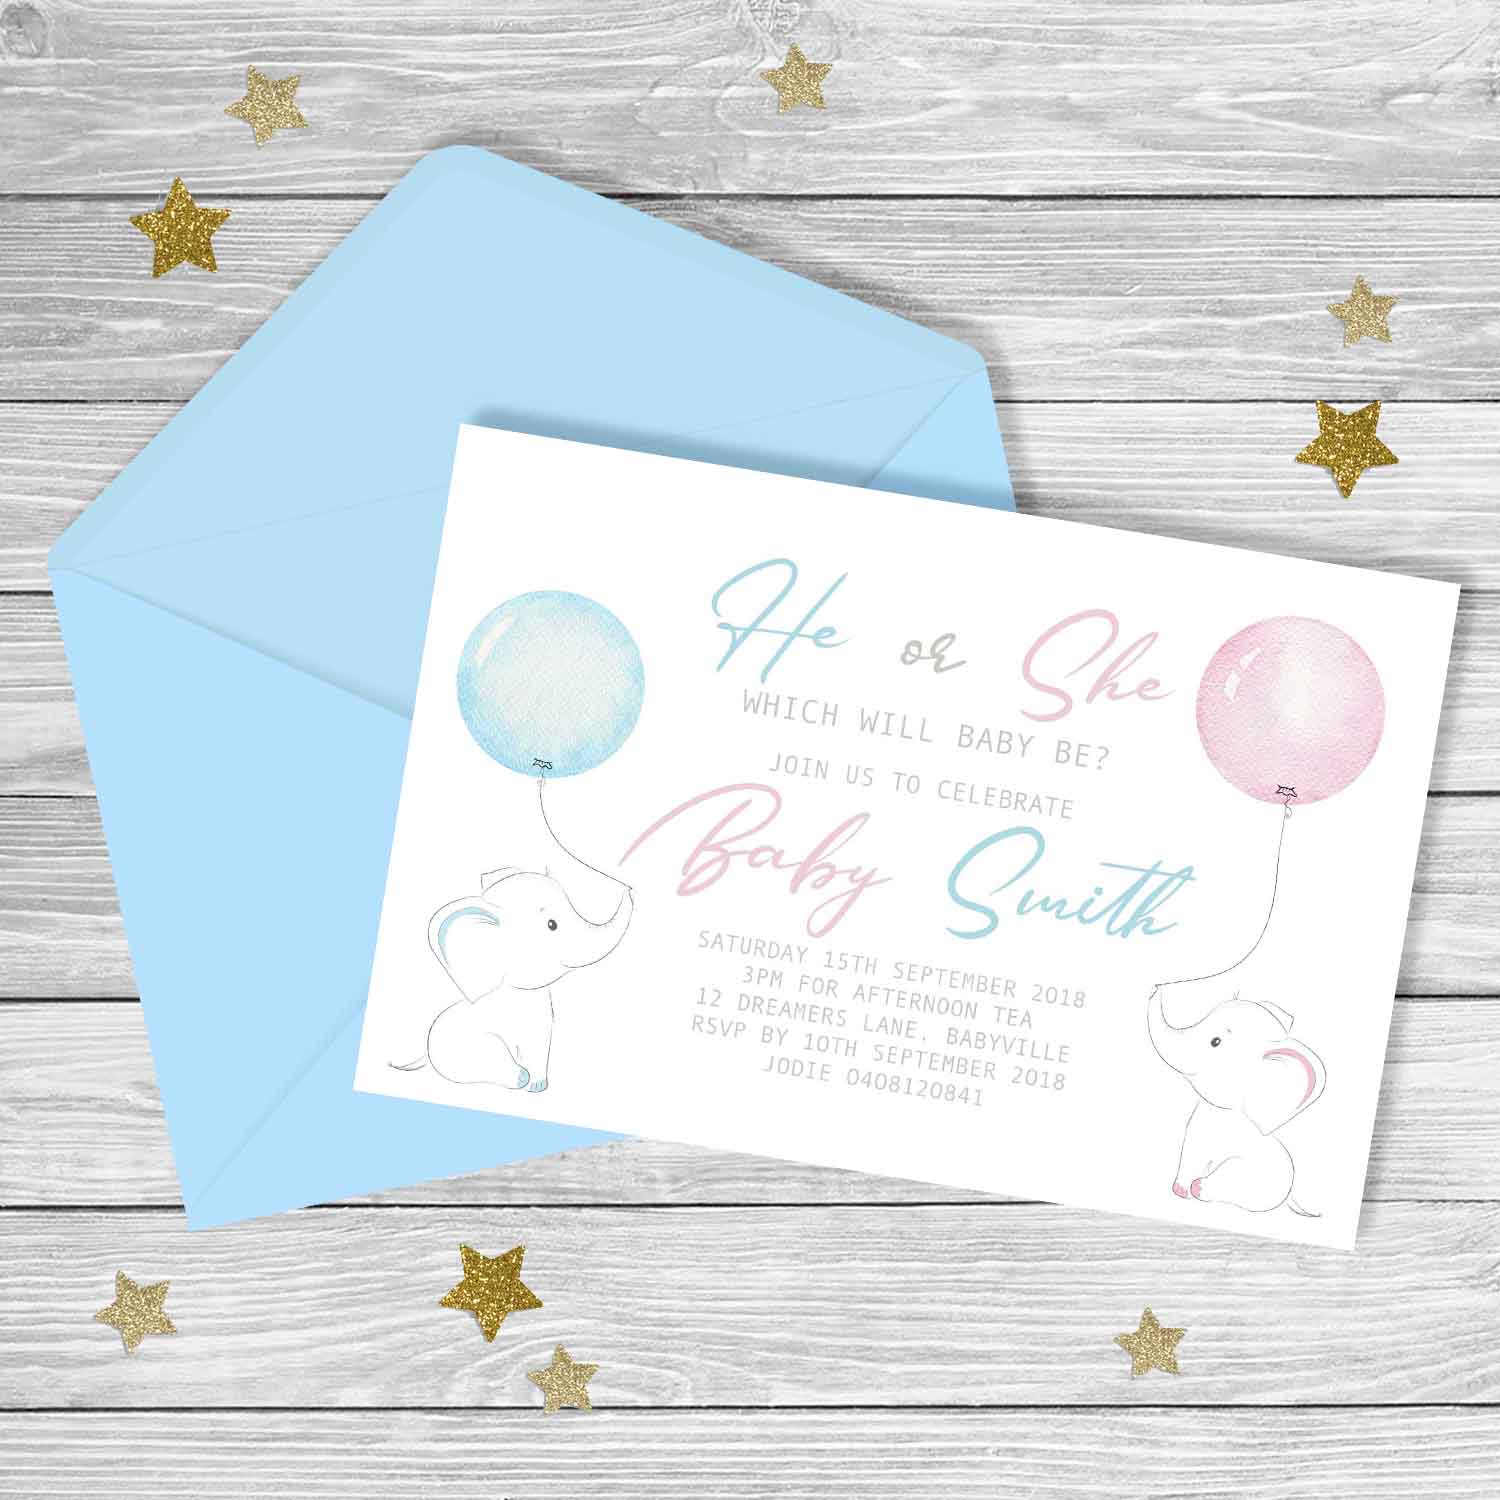 Baby ShowerGender RevealInvitation He or SheBlue or Pink 